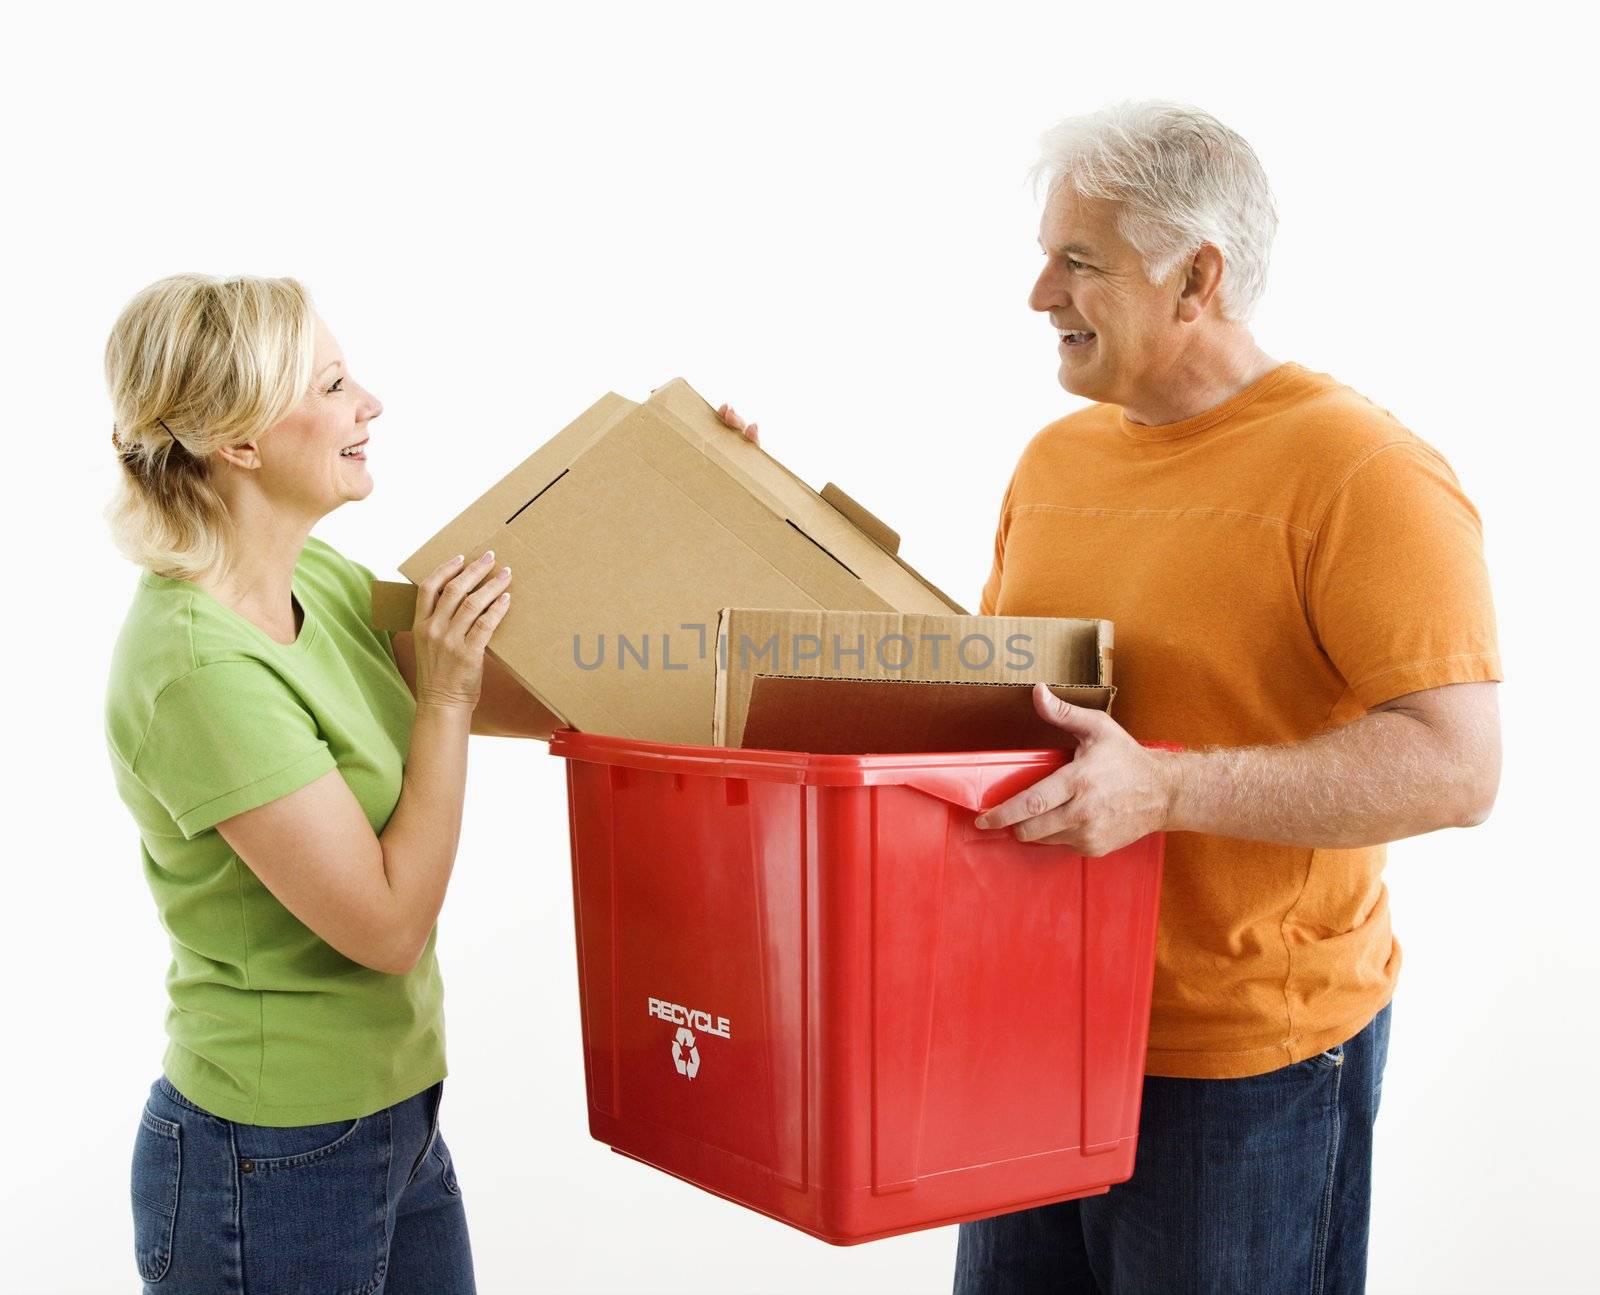 Man holding recycling bin while woman places cardboard into it.